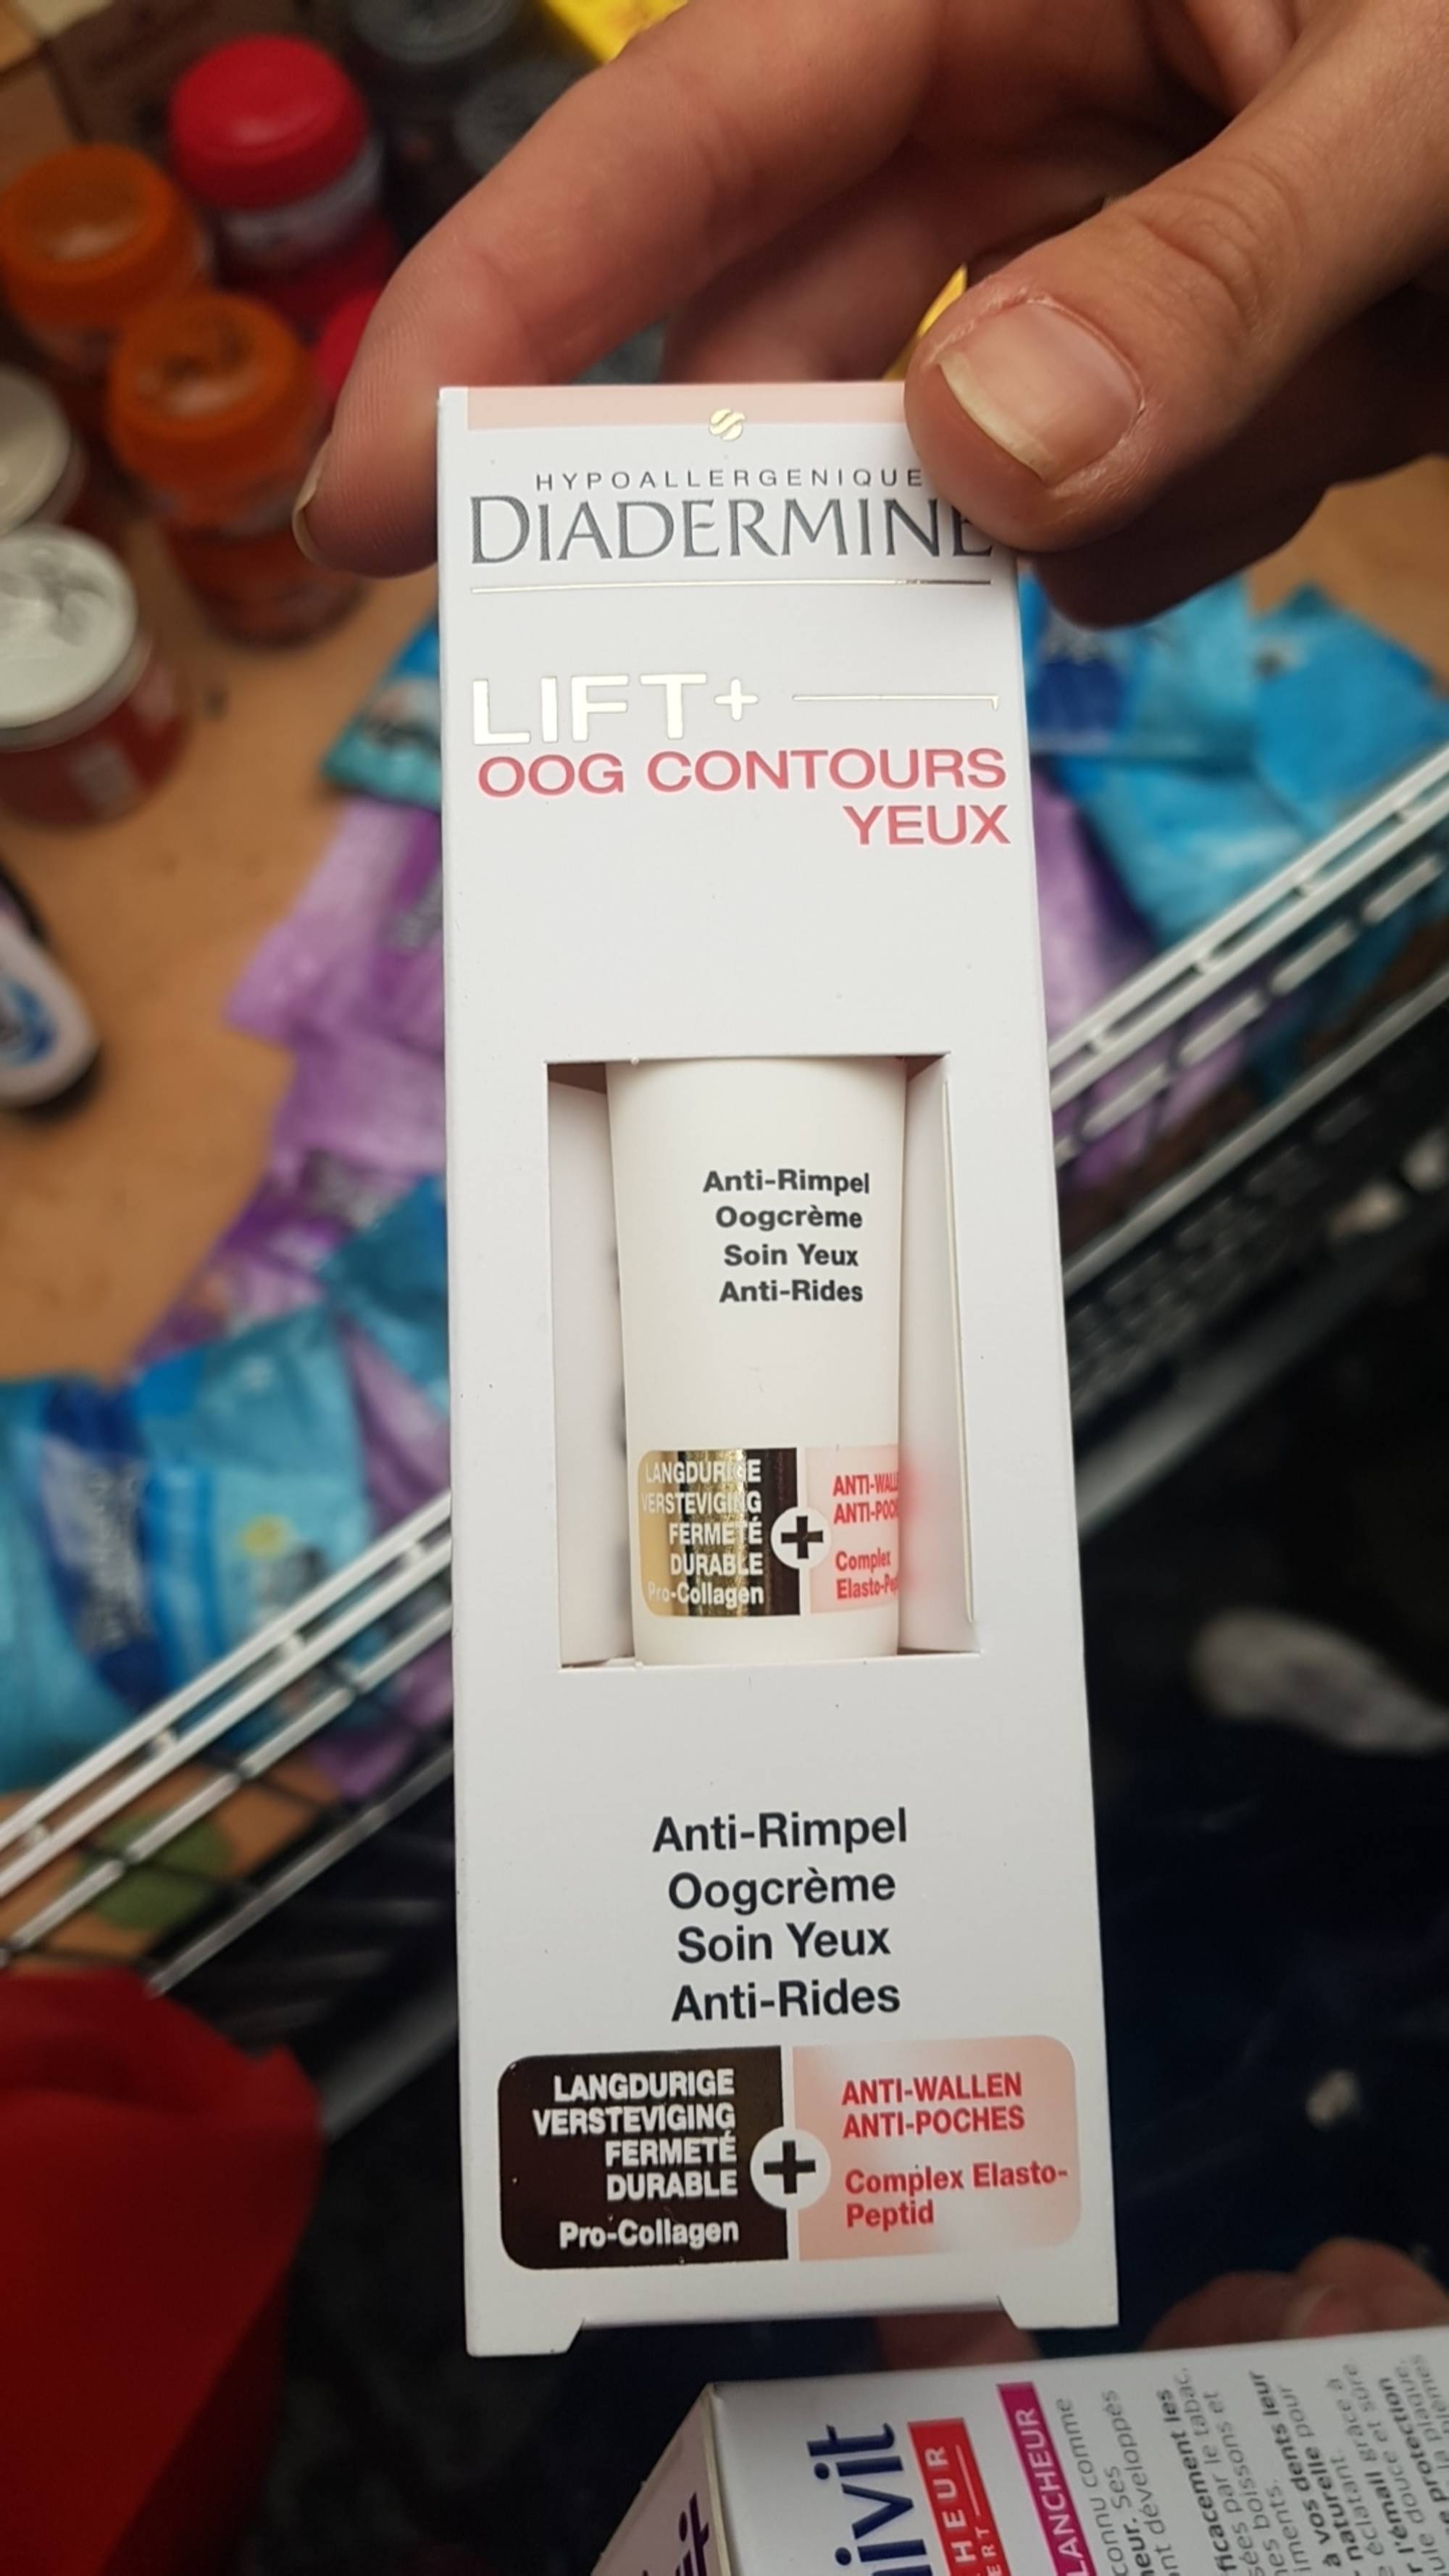 DIADERMINE - Lift+ - Oog contours yeux